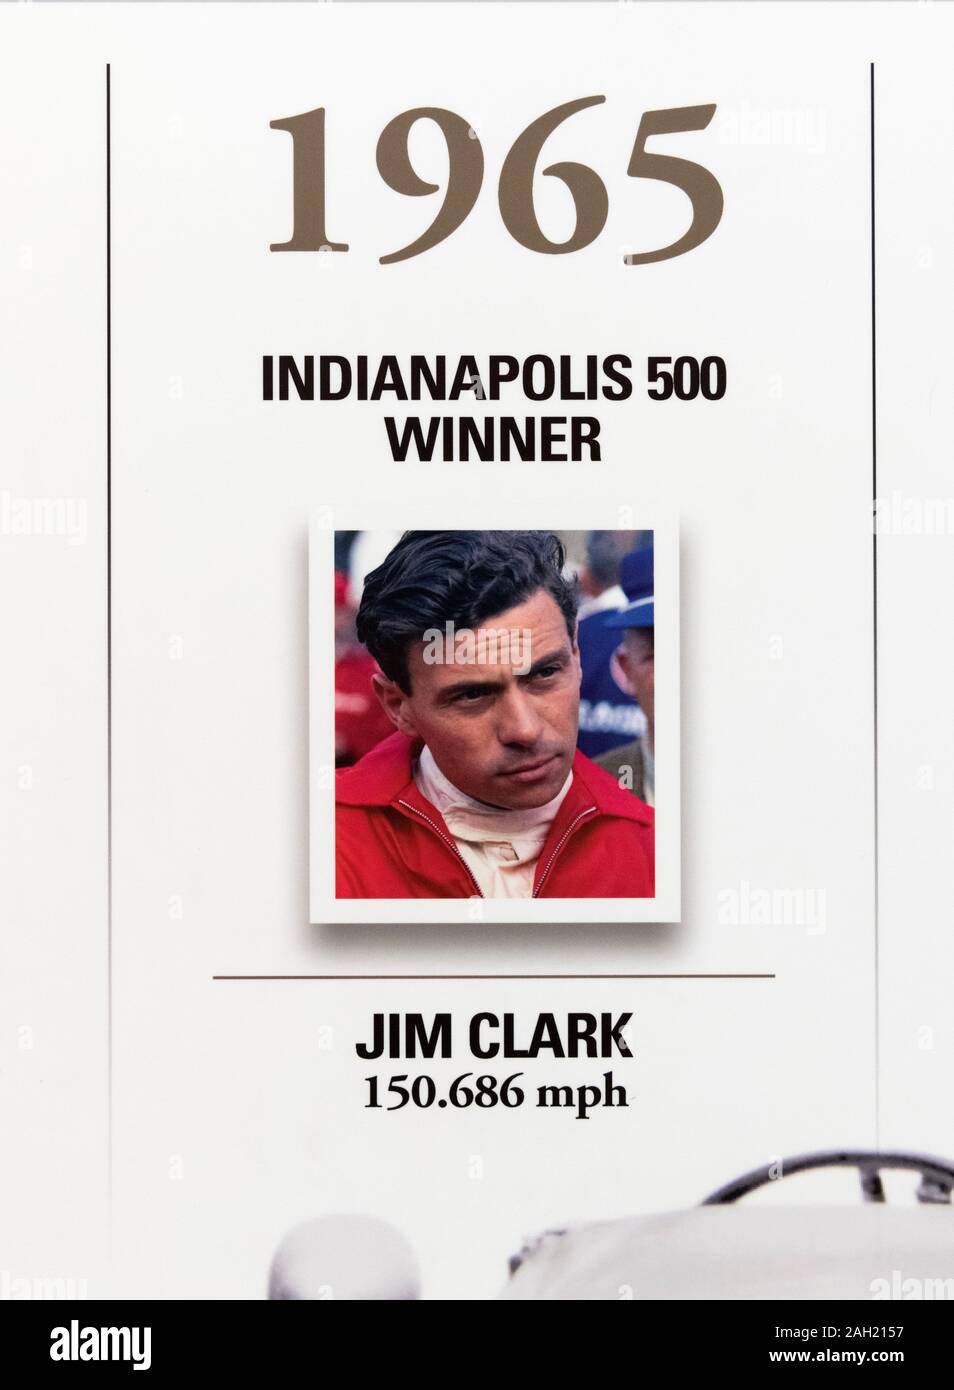 Jim Clark, winner of the 1965 Indy 500, on the Wall of Winners at the Indianapolis Motor Speedway Museum, Indianapolis, Indiana, USA. Stock Photo